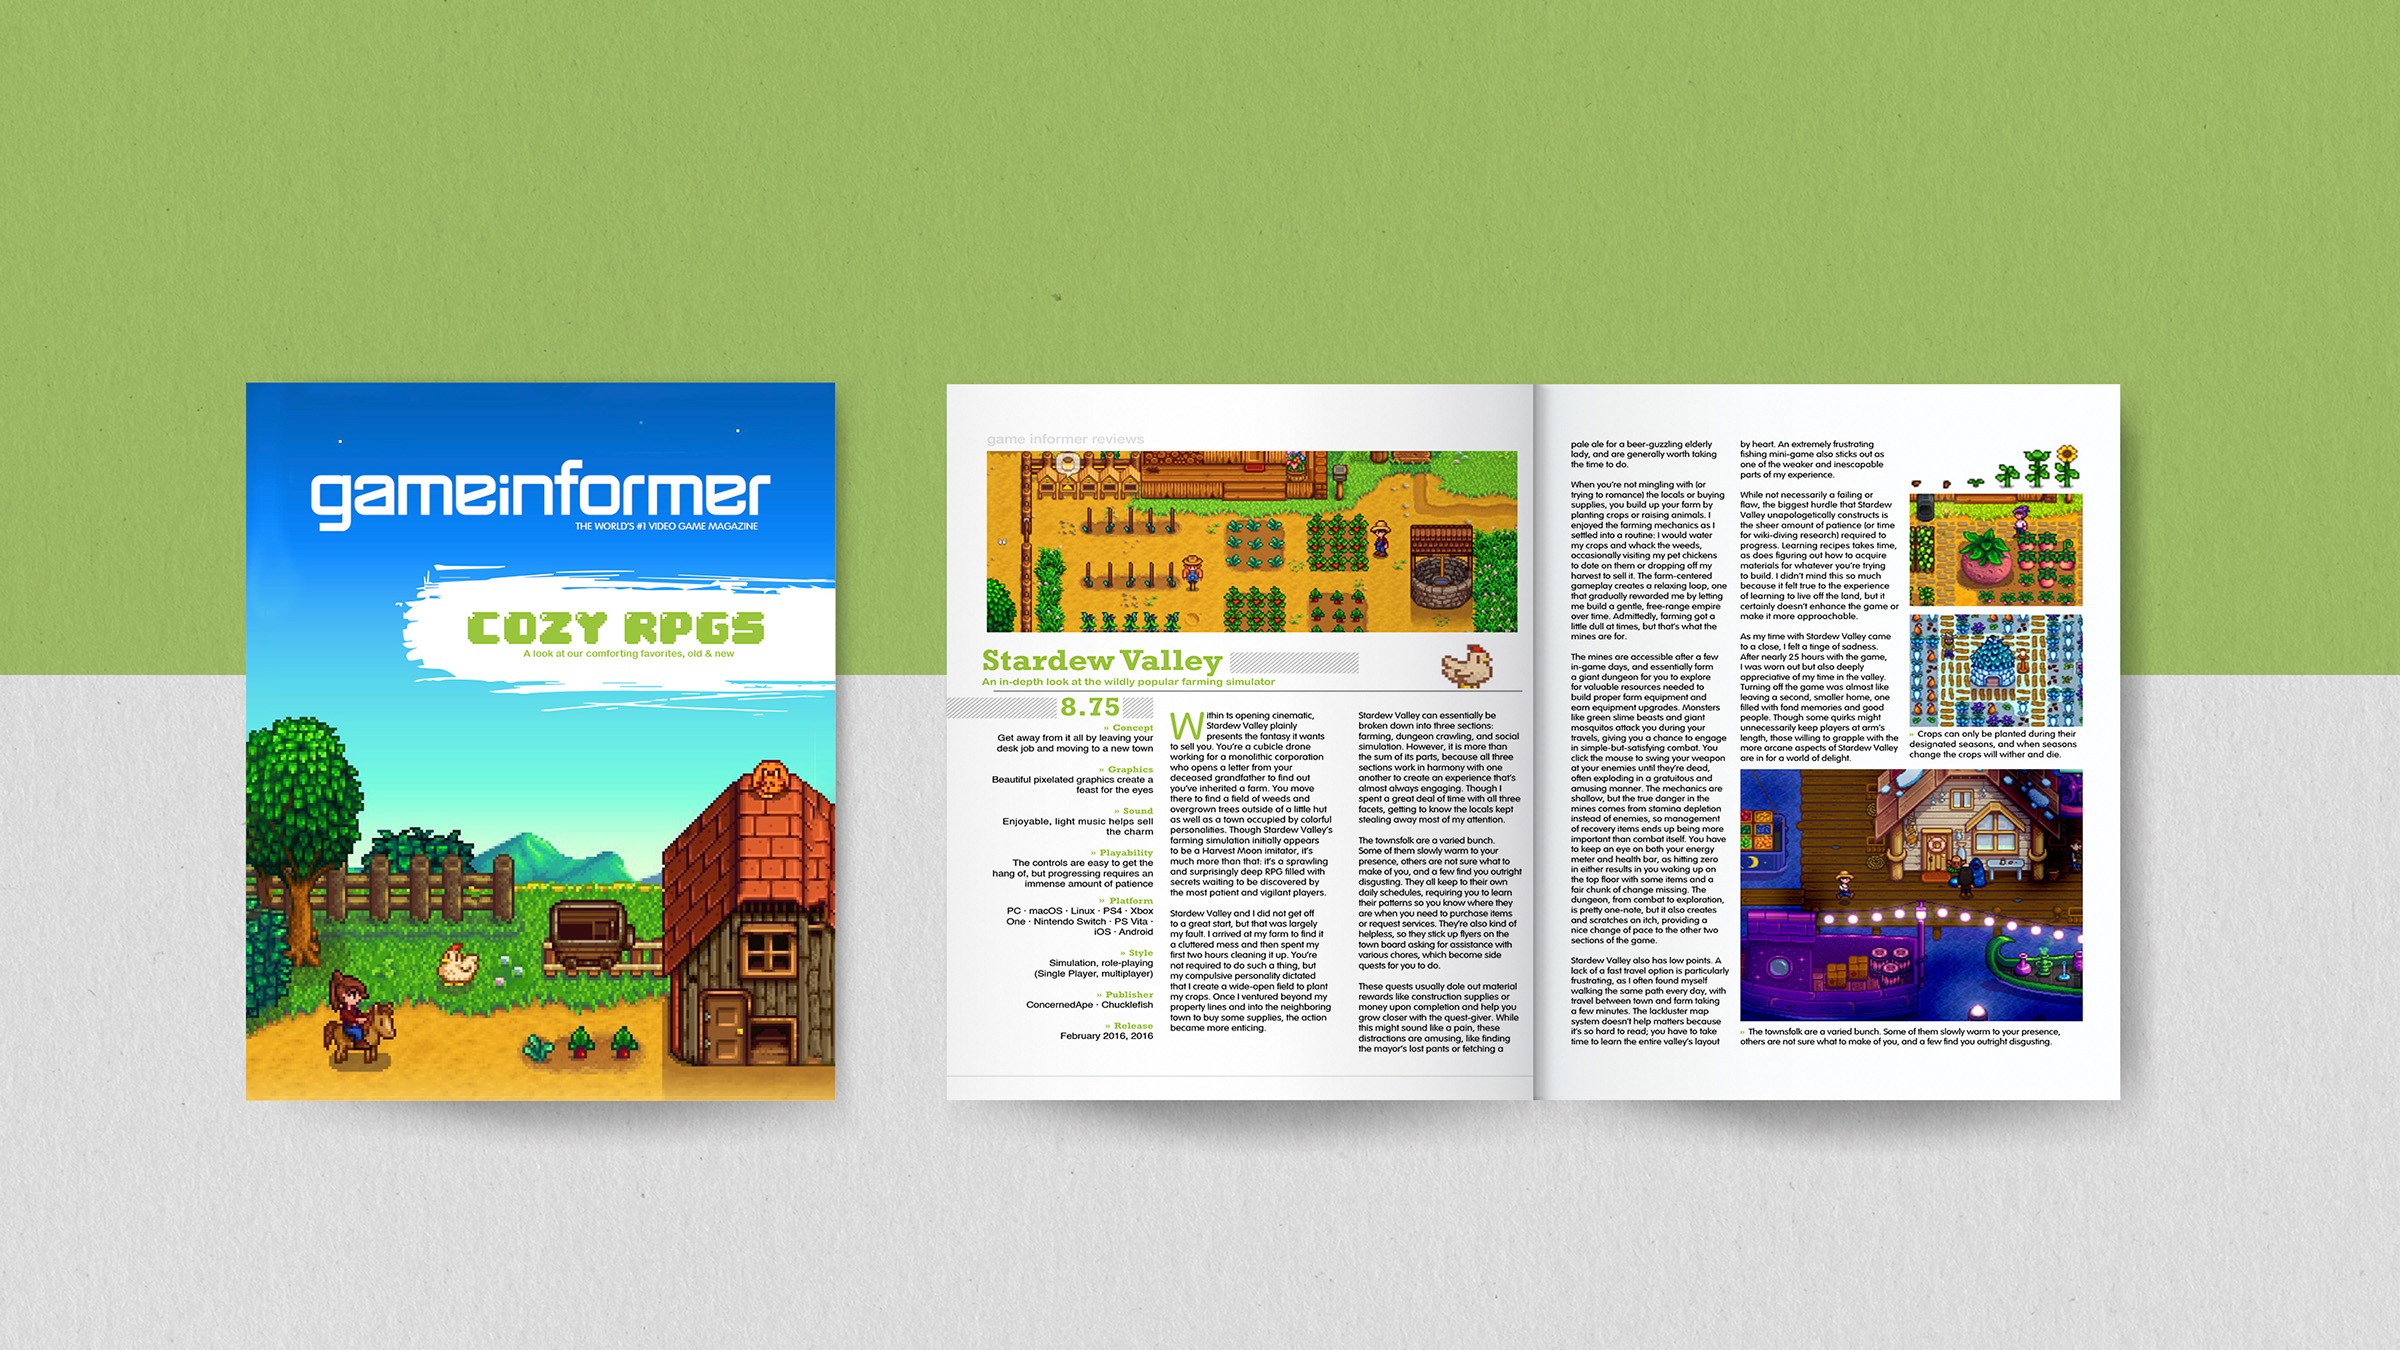 "Stardew Game Informer Article" / "Stardew Game Informer Article", magazine layout design, 8.5x11 print article, 2022. This layout is based on the design of Game Informer magazine, a gaming magazine featuring the game Stardew Valley.